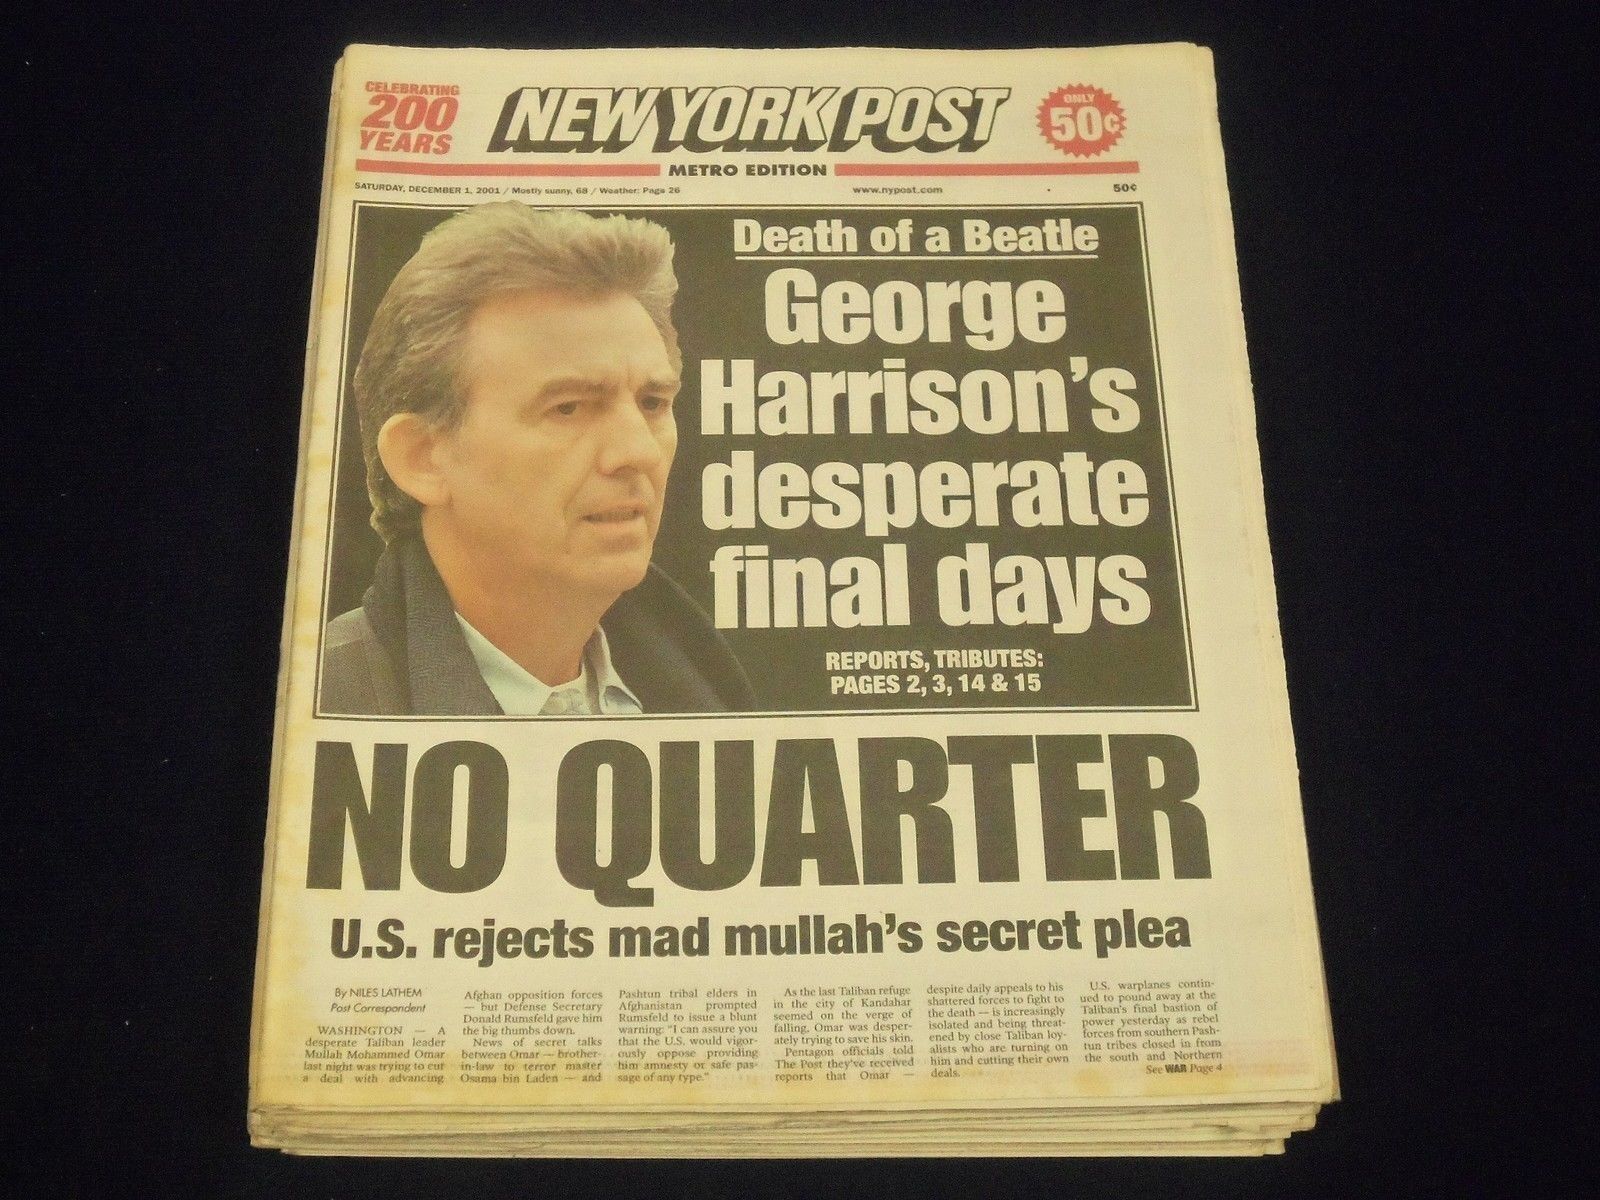 2001 DEC 1 NY POST NEWSPAPER LOT OF 15 - GEORGE HARRISON FINAL DAY'S - NP 1825